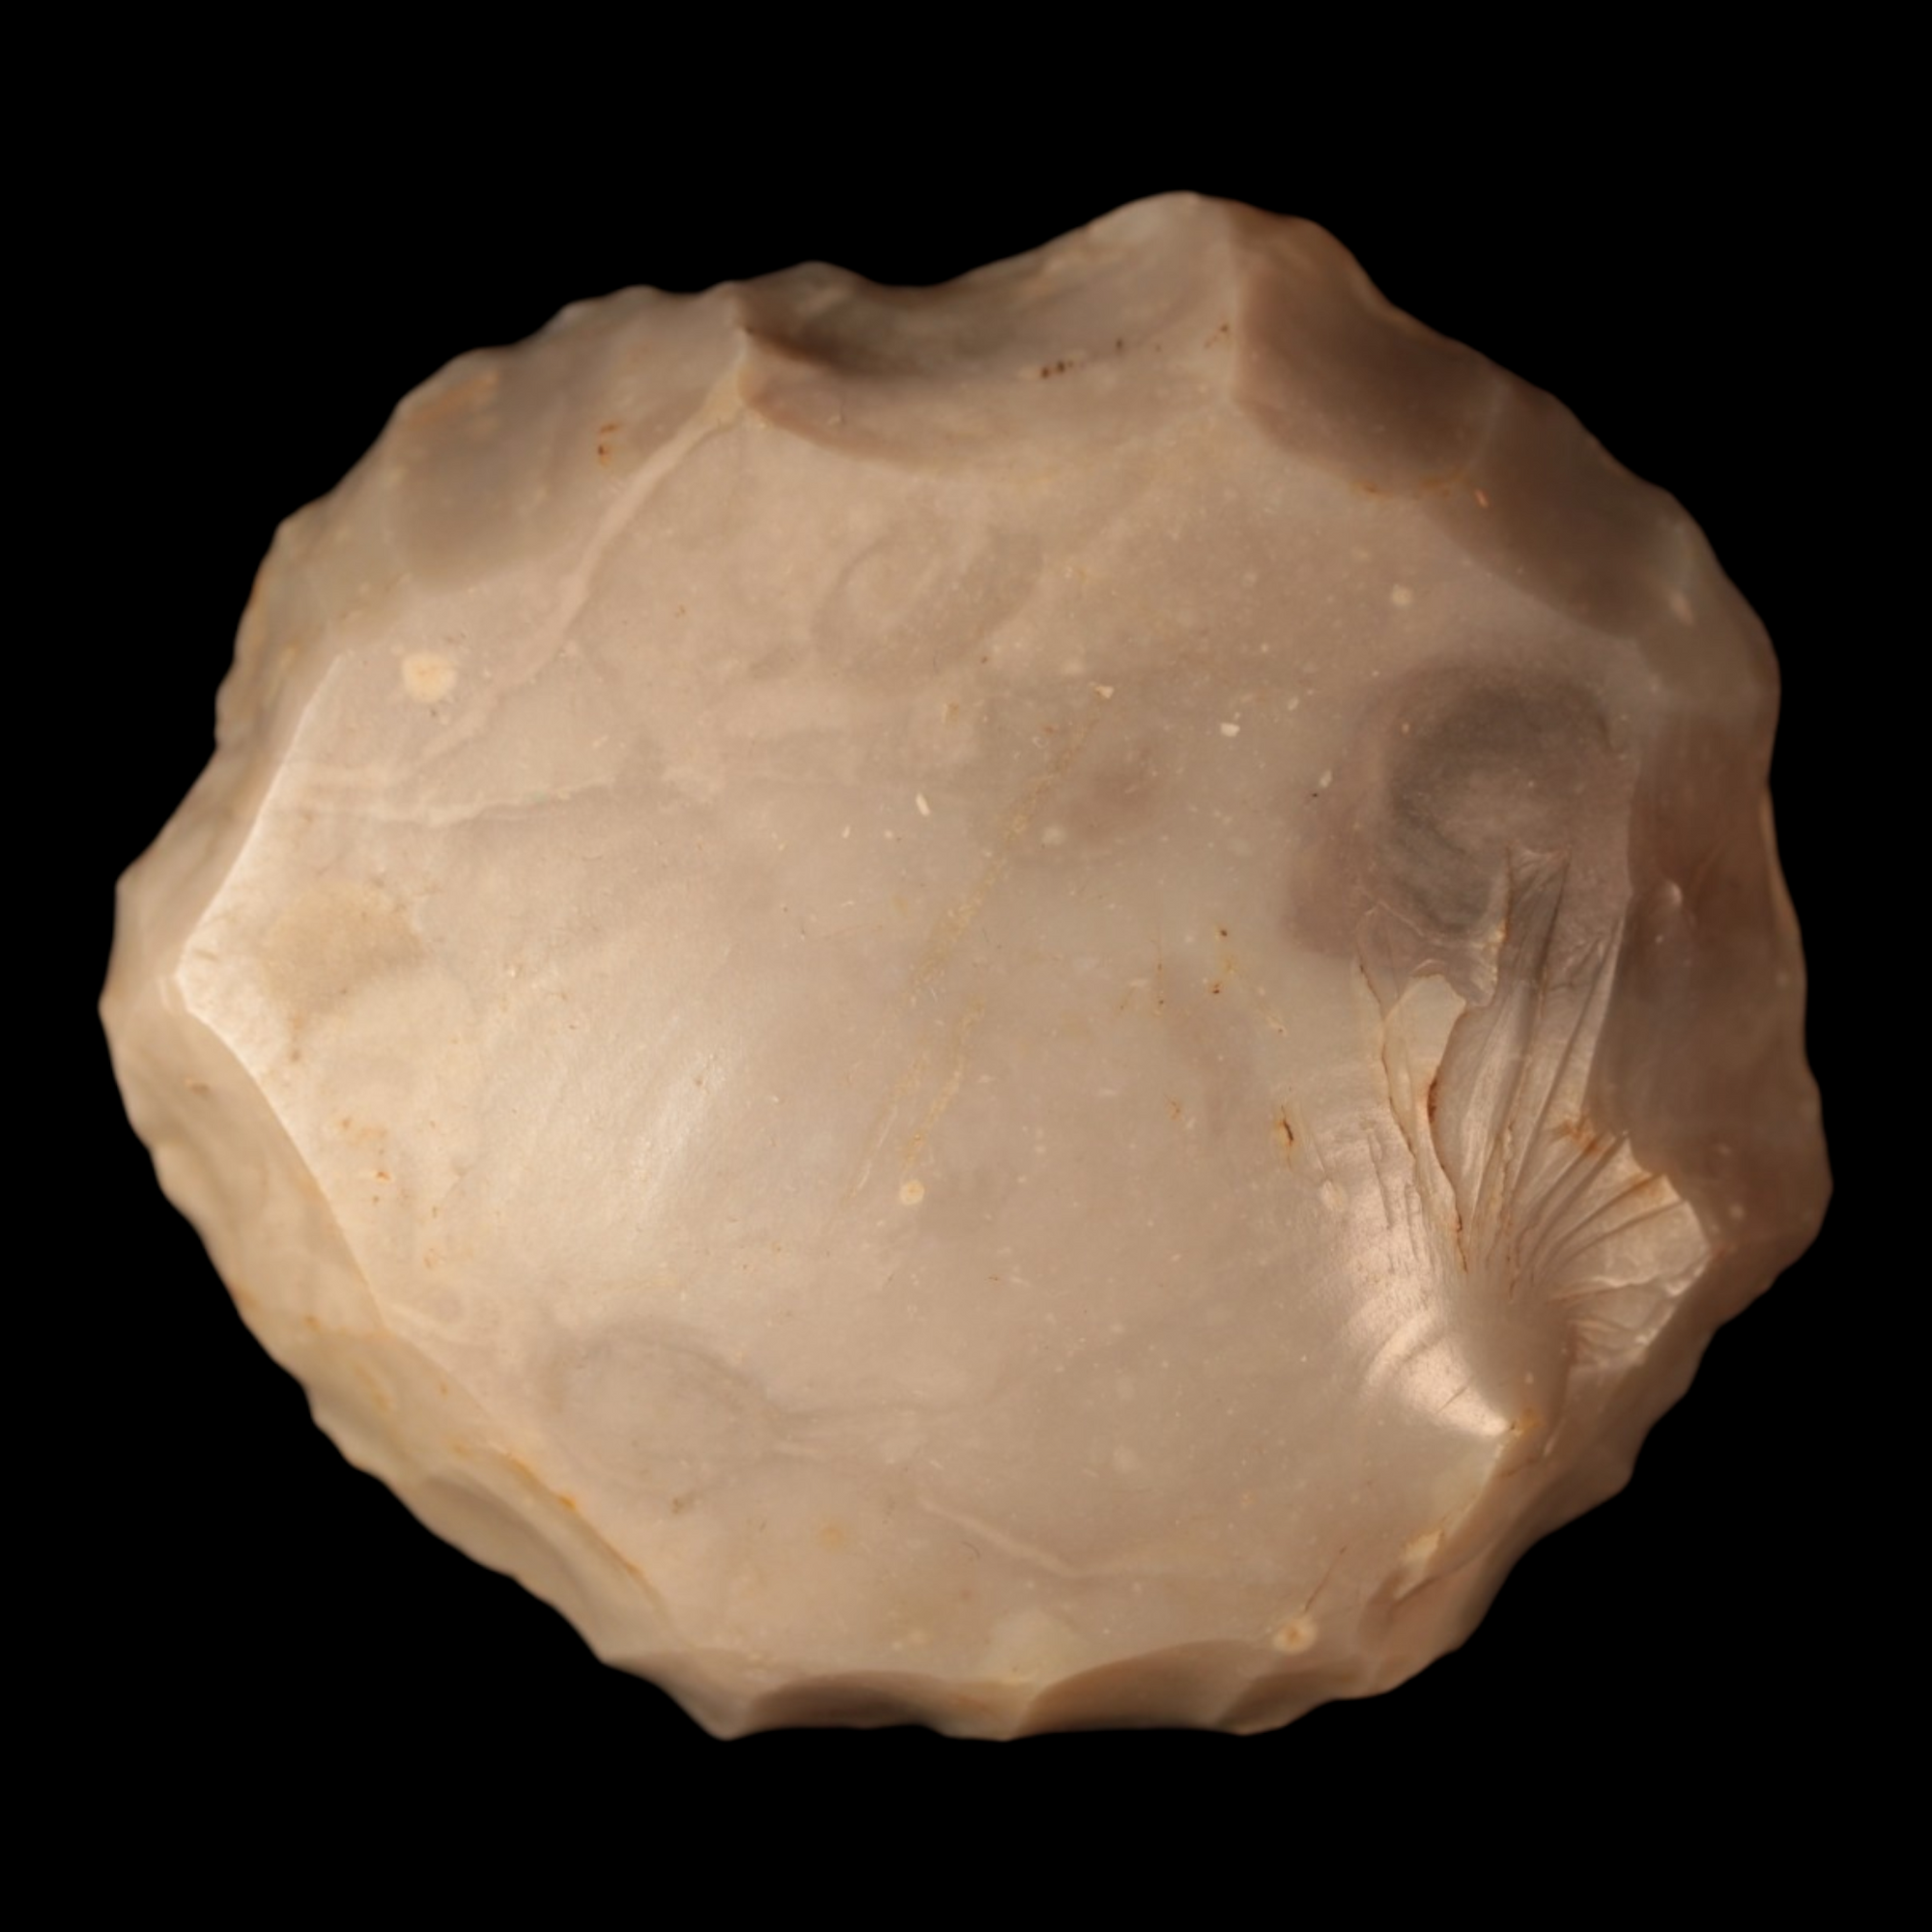 Danish Mesolithic Stone Tool #1 (2.1 inches) - c. 9000 to 5000 BCE - Denmark - 7/12/23 Auction